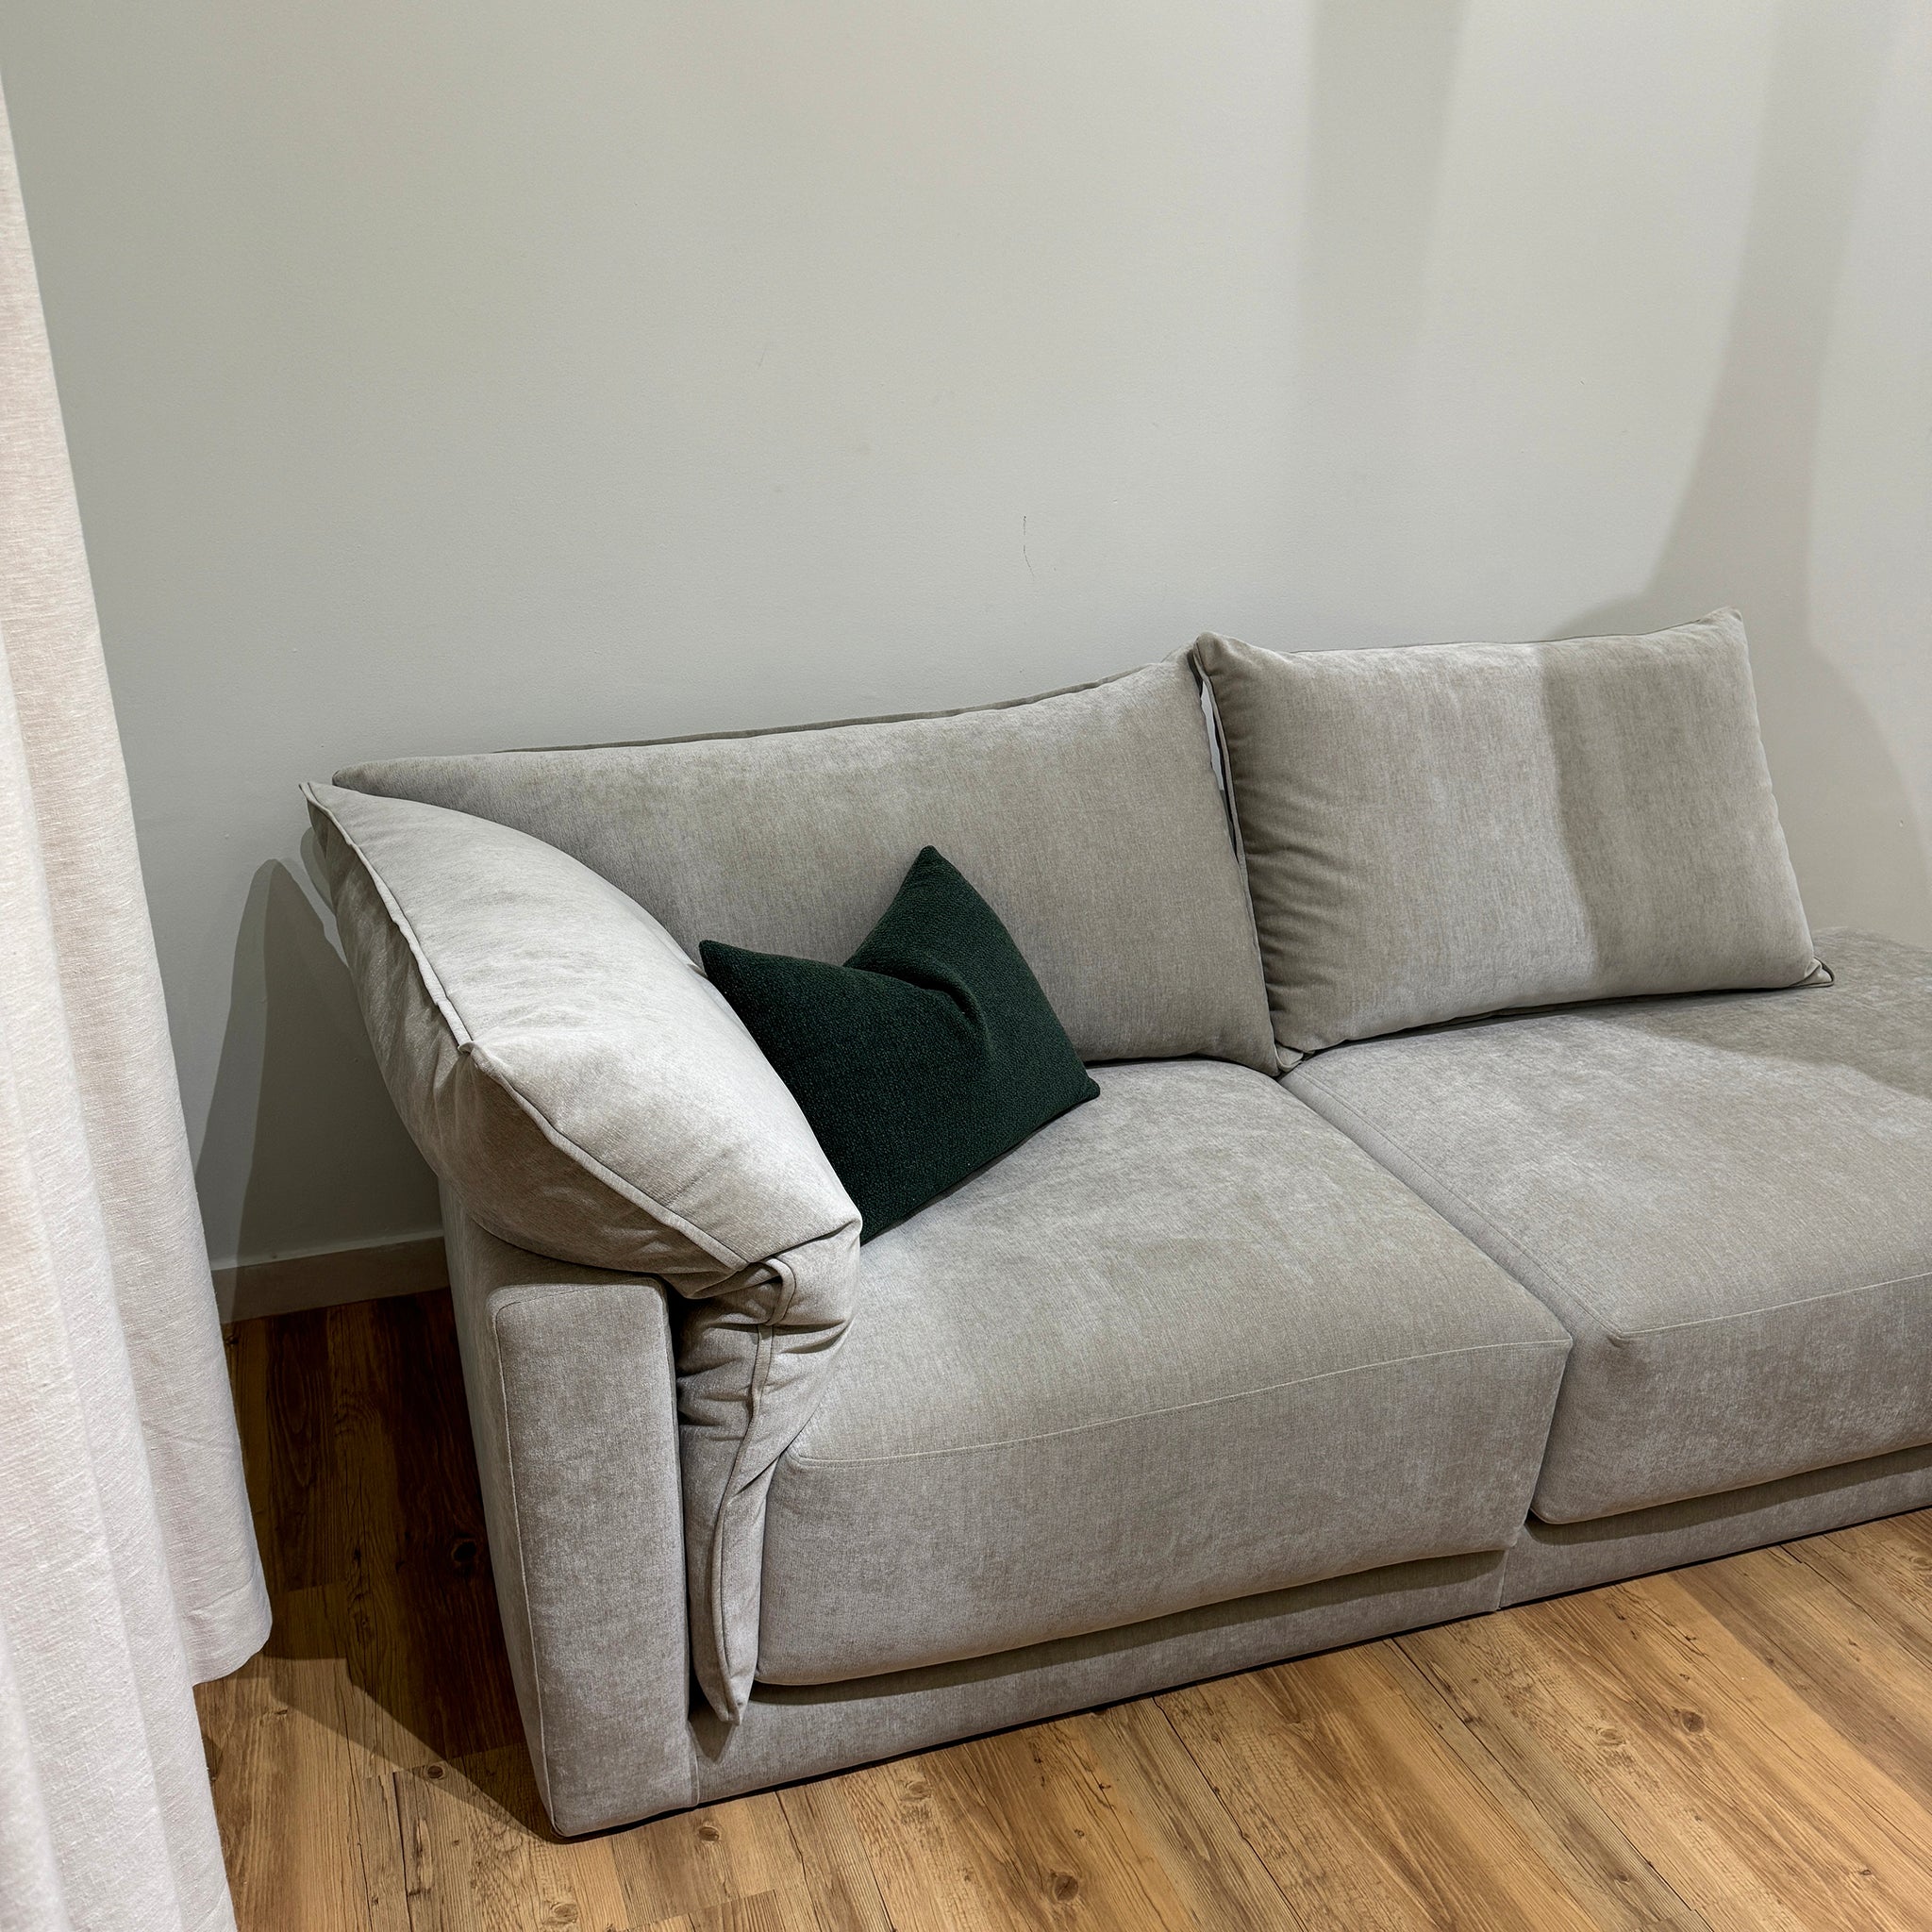 Gray plush Constance sofa in living room with wooden floor, perfect for relaxation